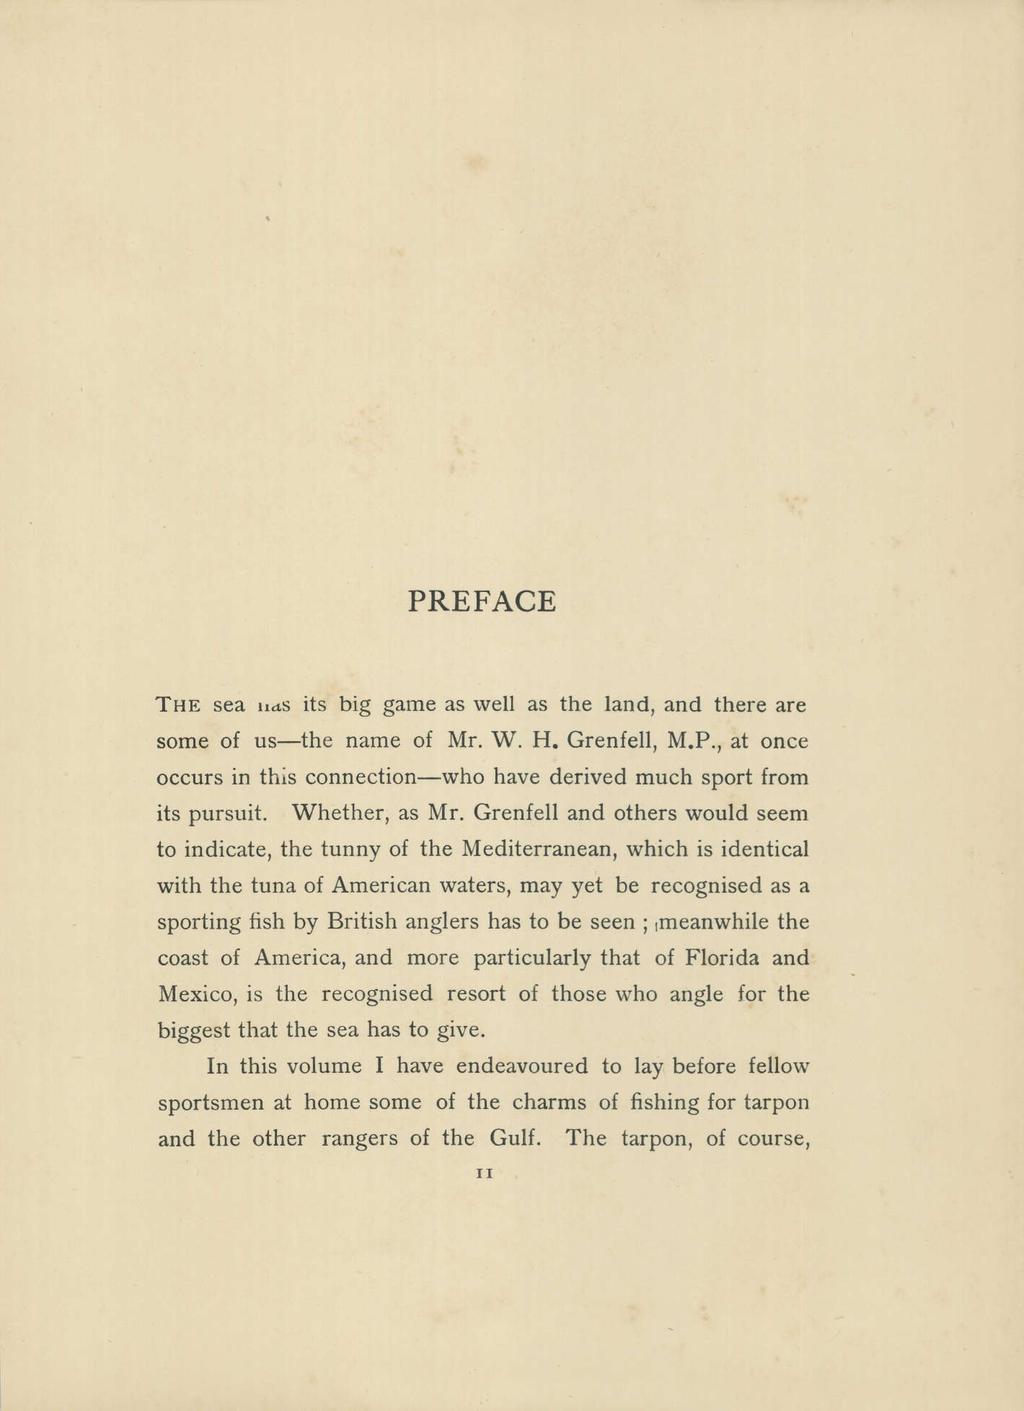 PREFACE THE sea HaS its big game as well as the land, and there are some of us-the name of Mr. W. H. Grenfell, M.P., at once occurs in this connection-who have derived much sport from its pursuit.